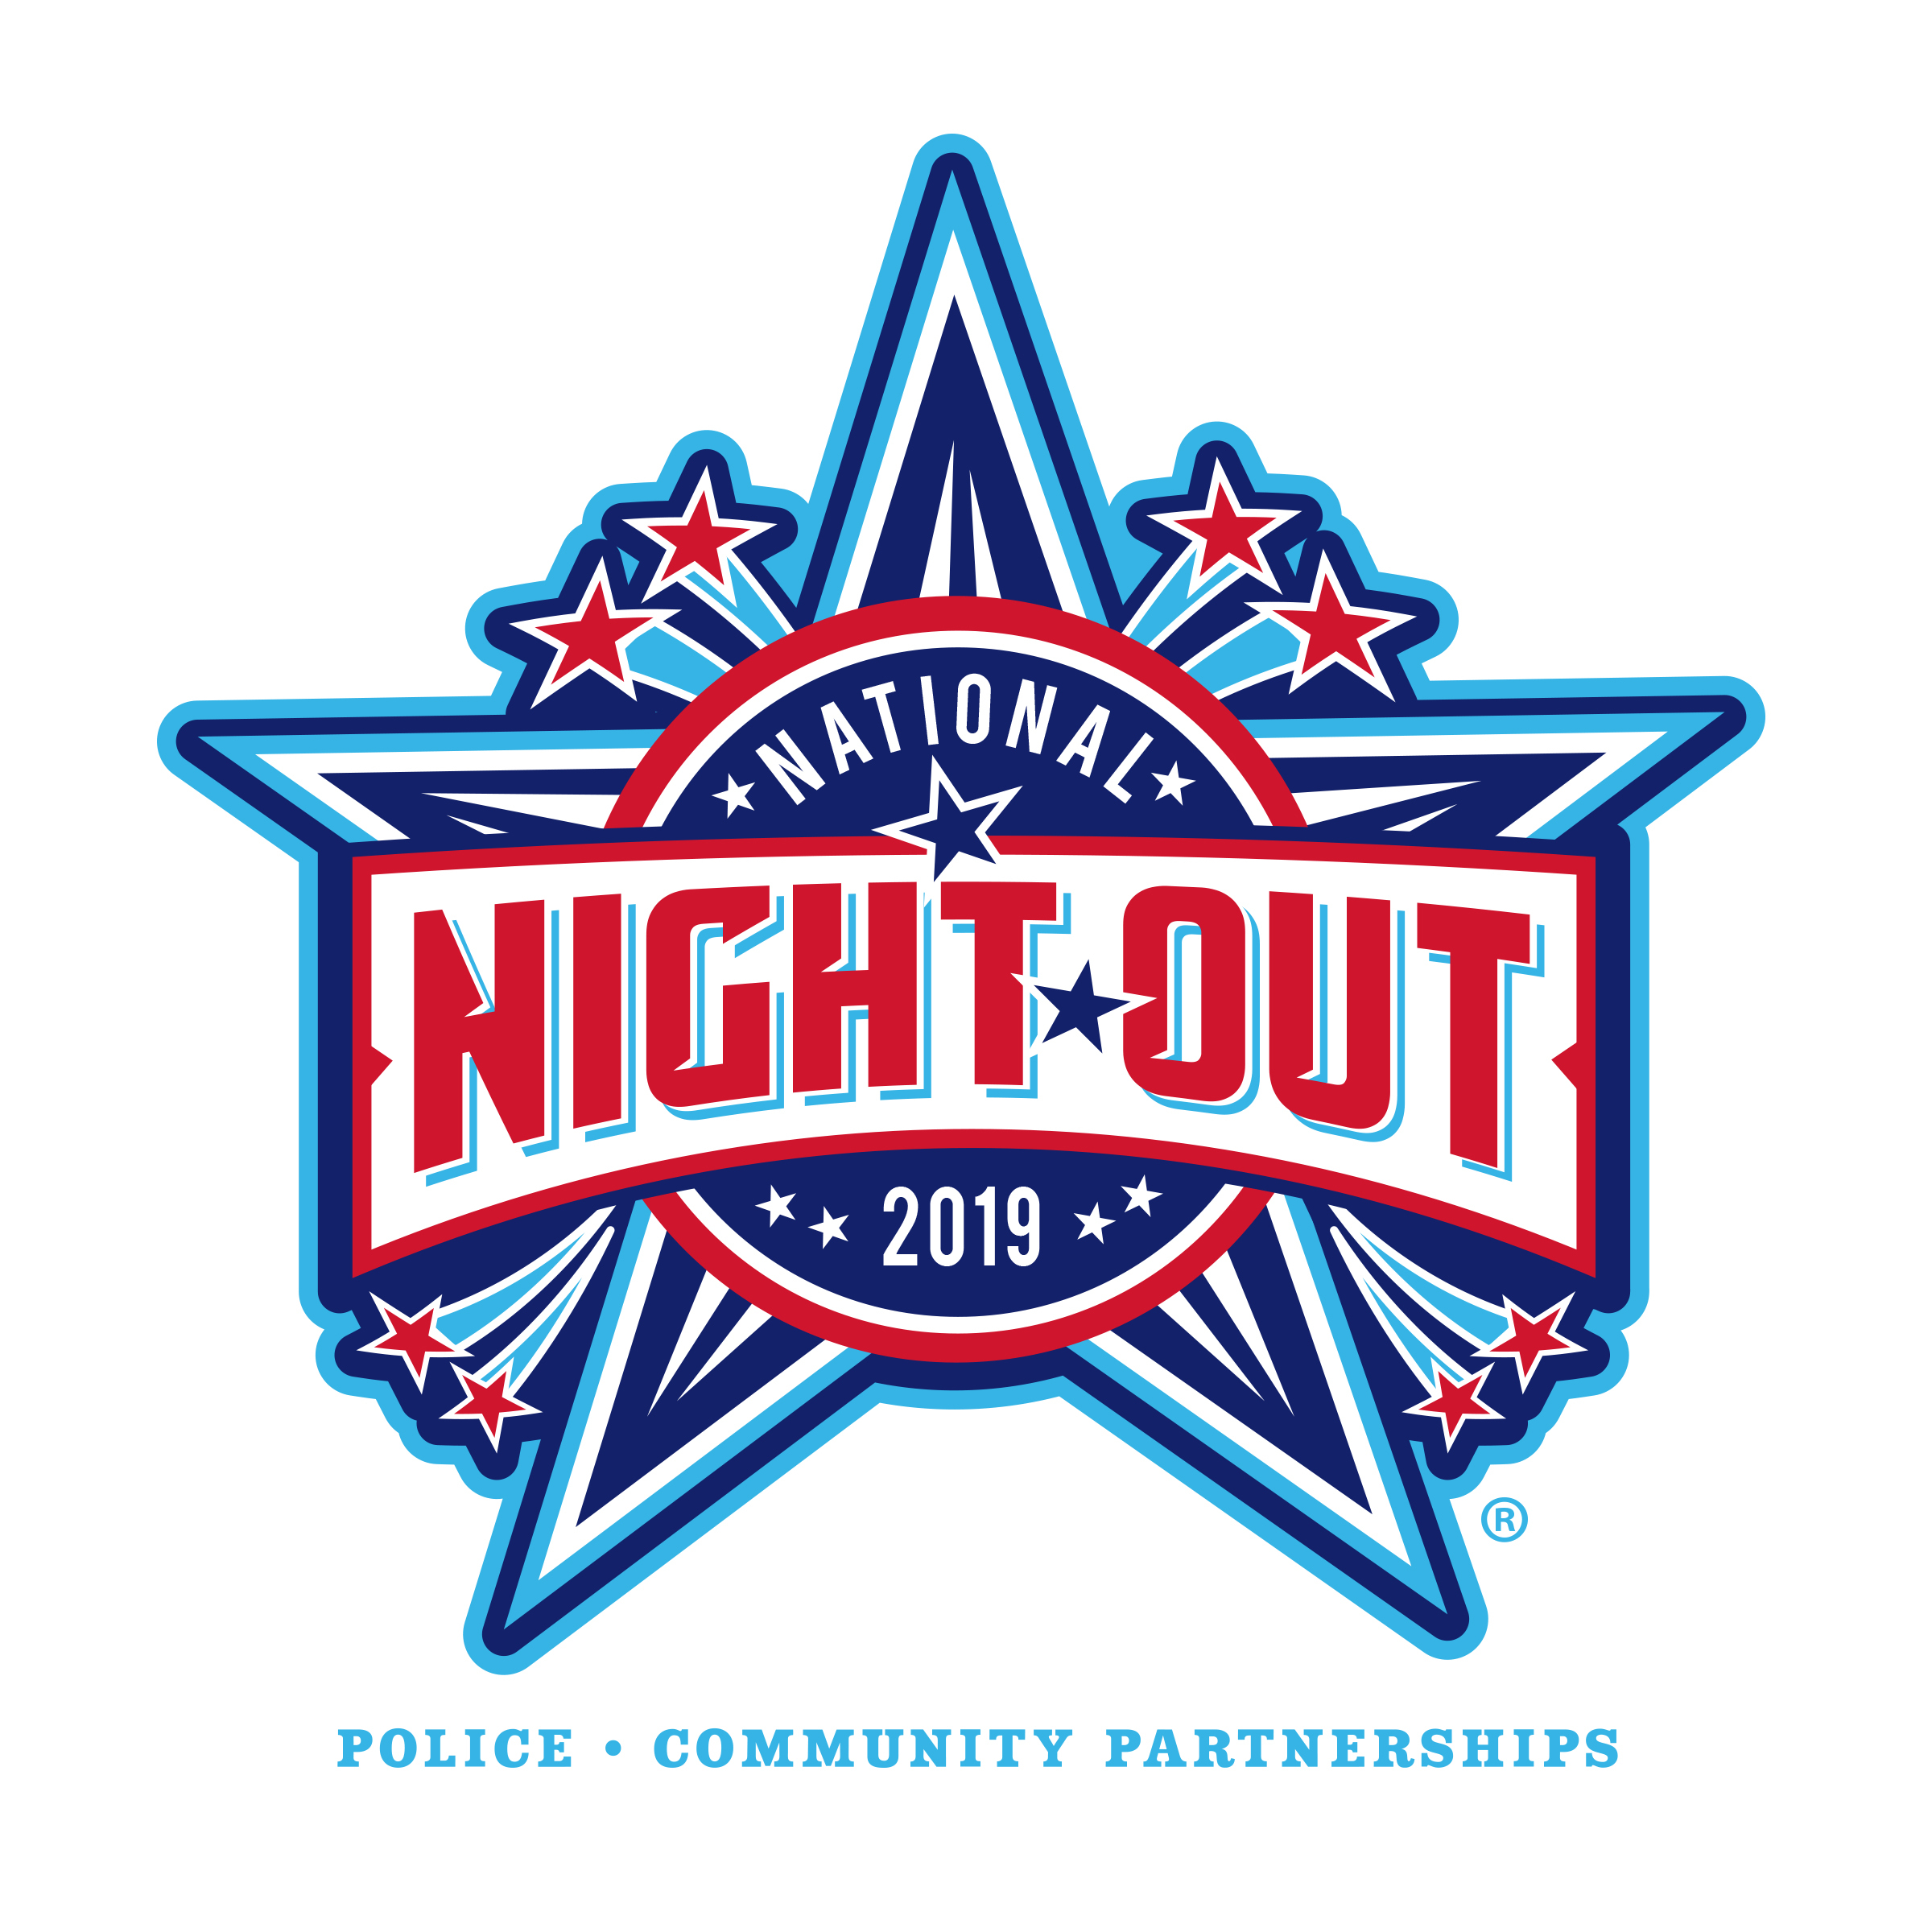 Event Promo Photo For National Night Out Community Block Party